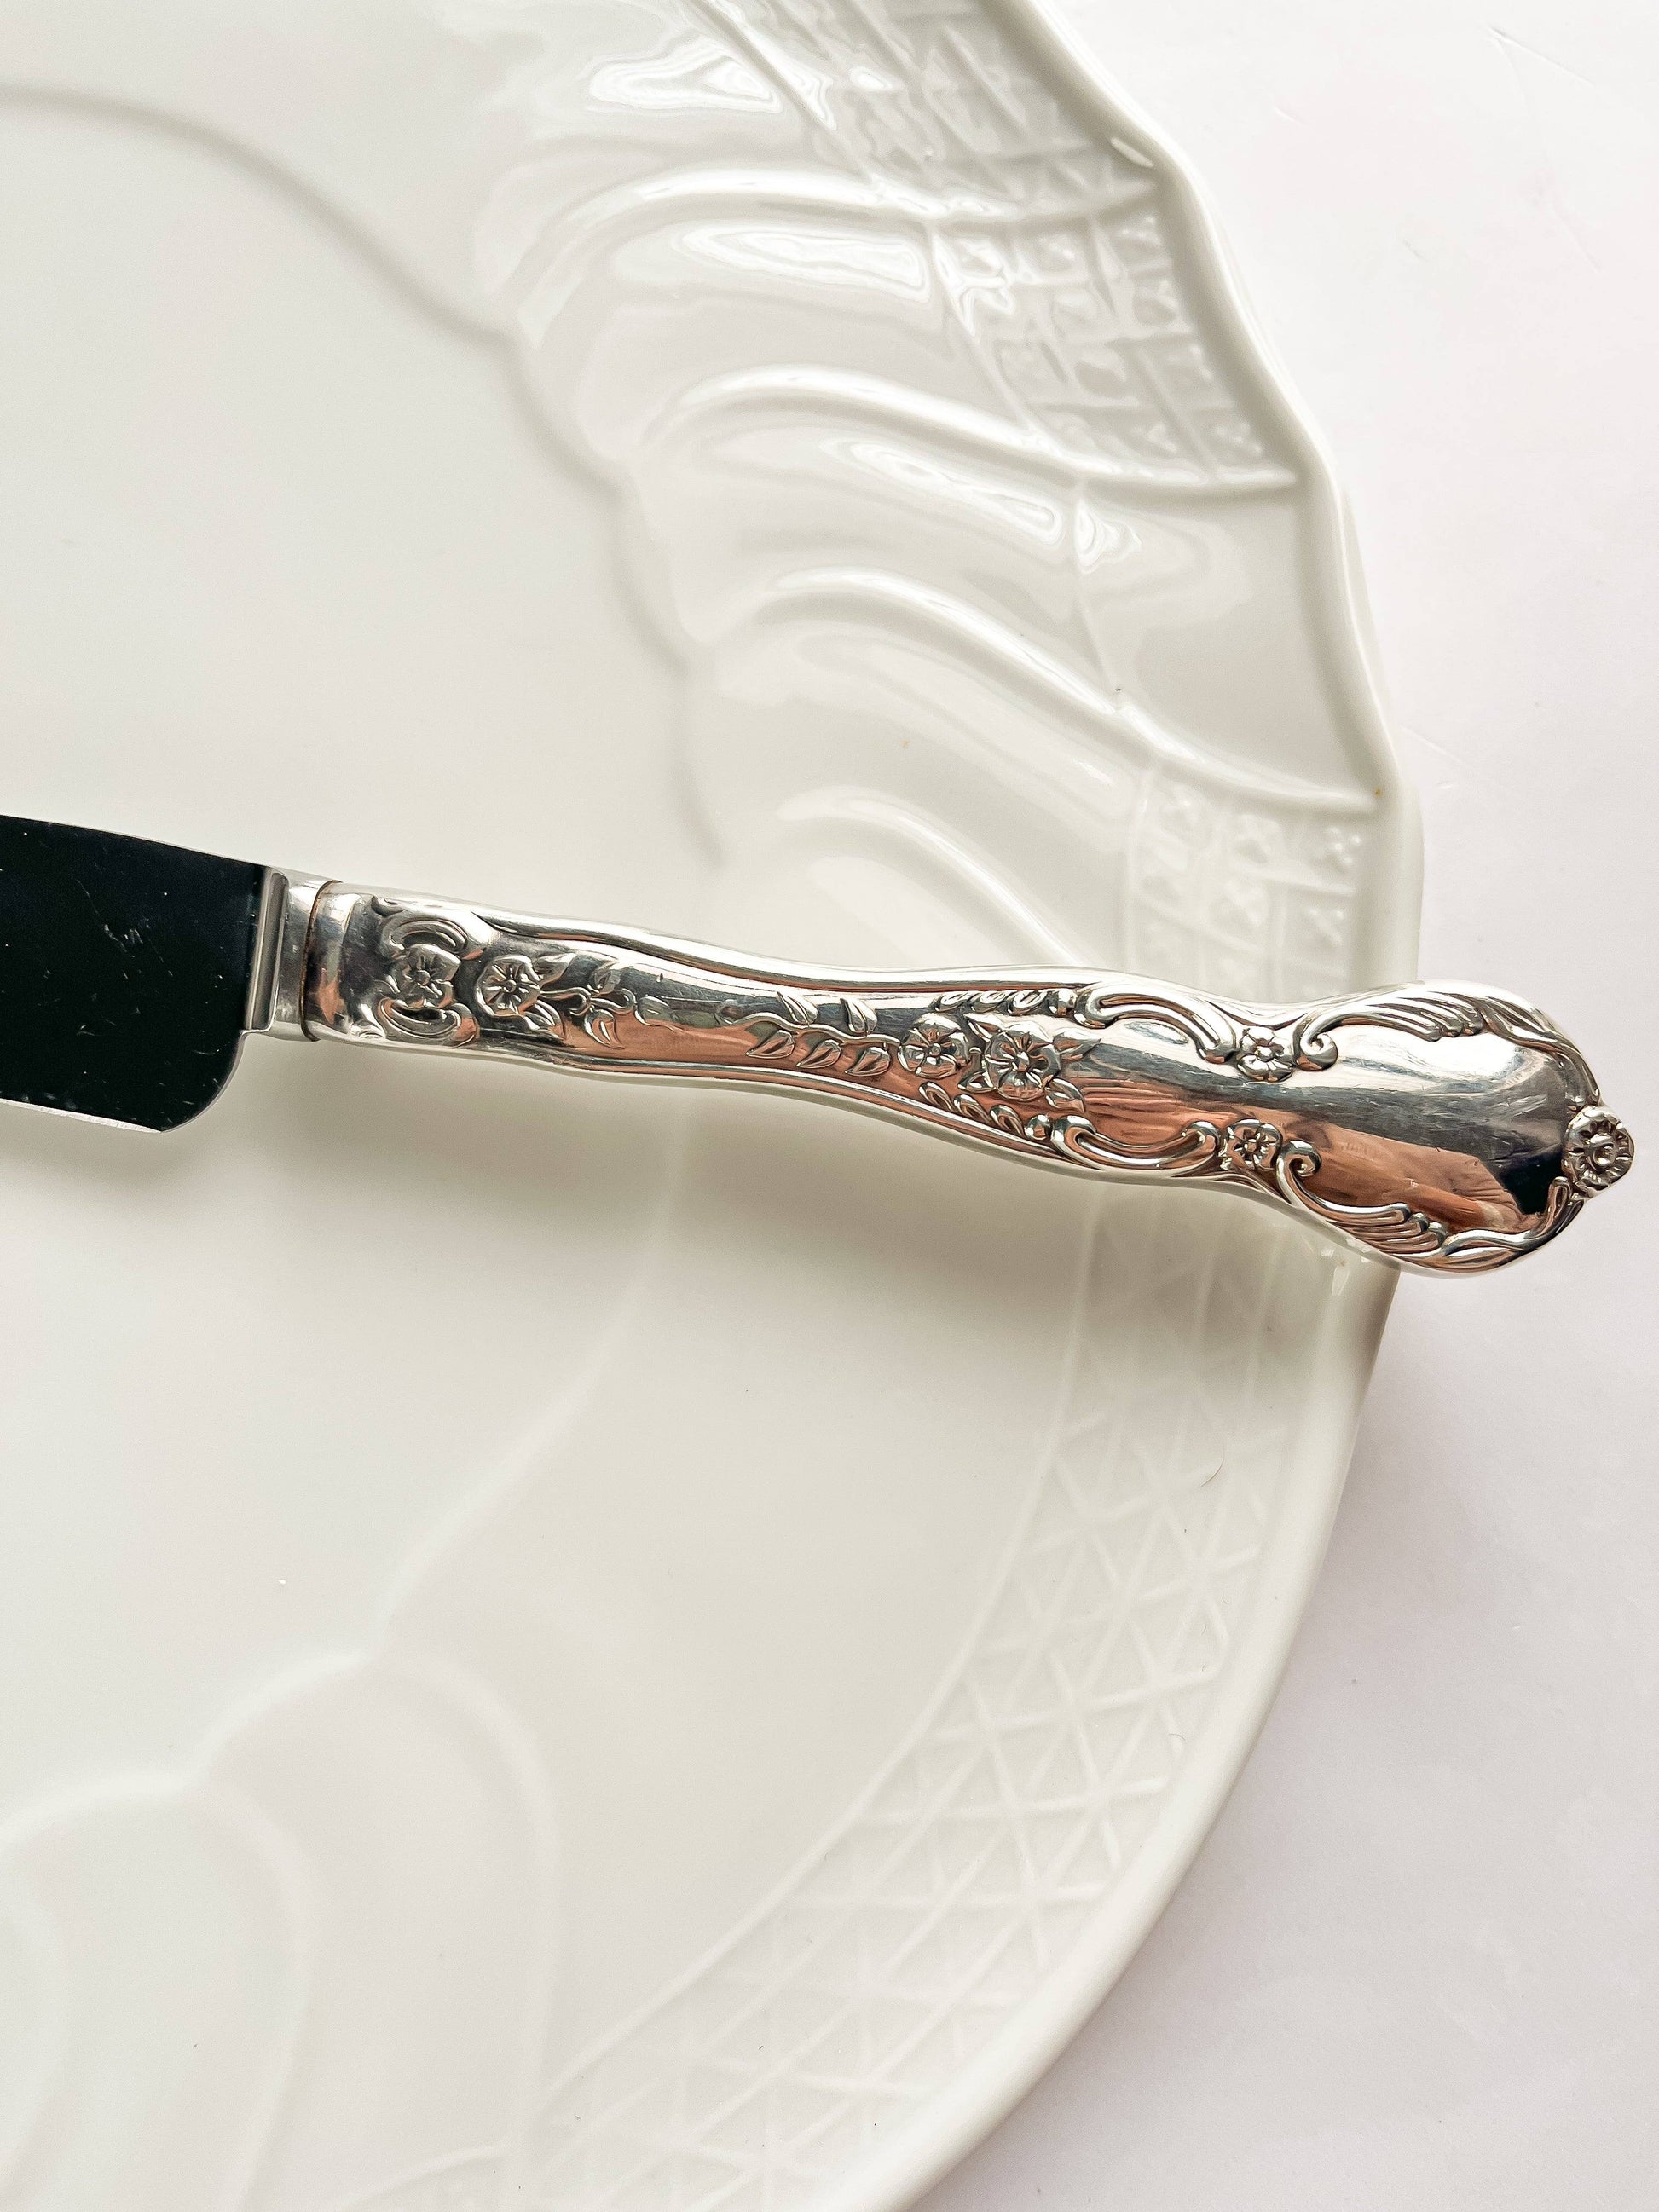 Rodd Carving Knife - ‘Camille’ Pattern - SOSC Home